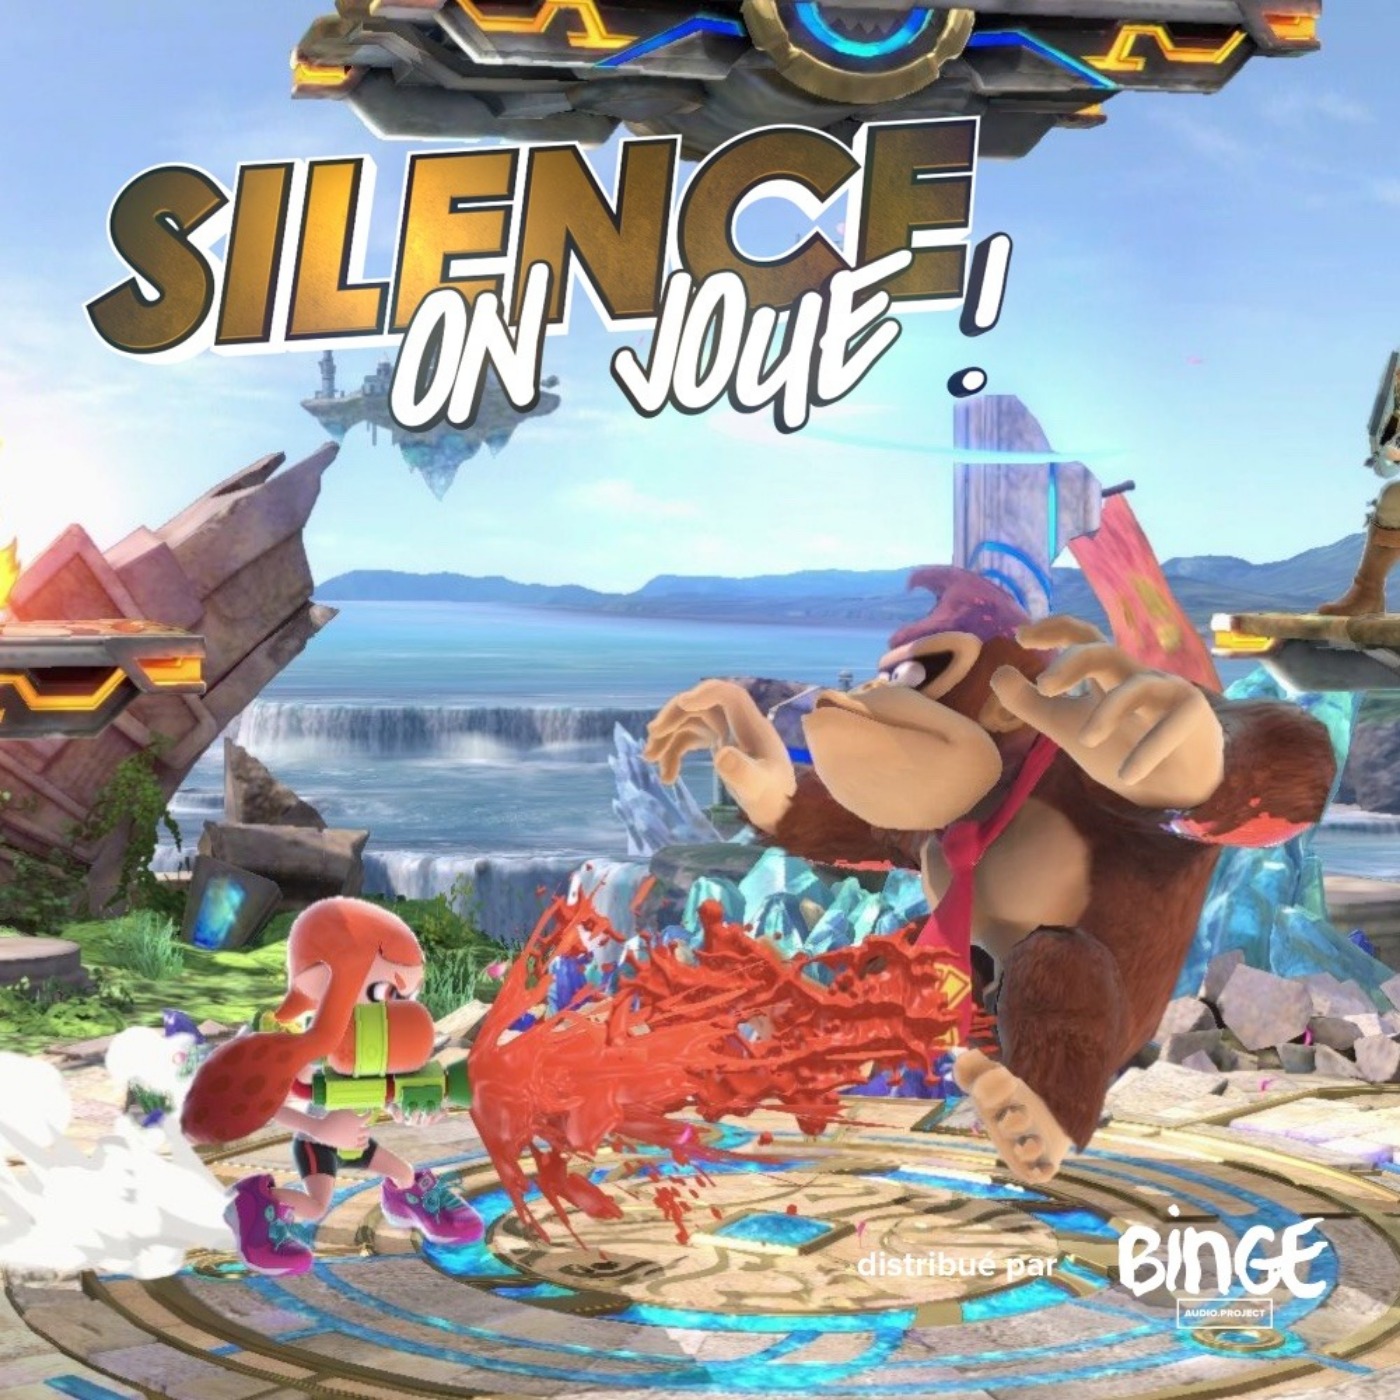 Silence on joue ! « Super Smash Bros. Ultimate », « Gris »